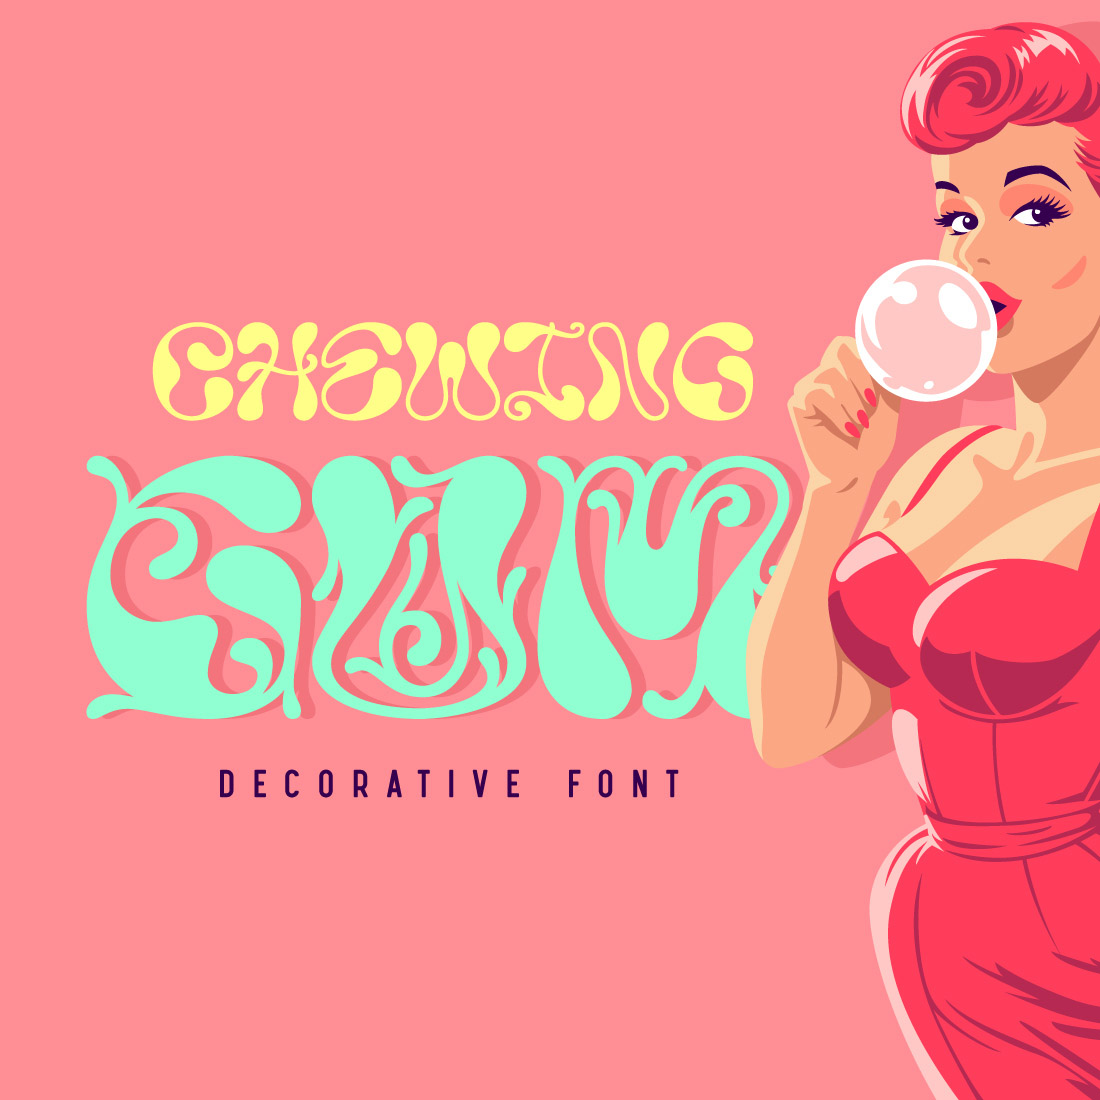 Chewing Gum - Font and Vector Bonus! cover image.